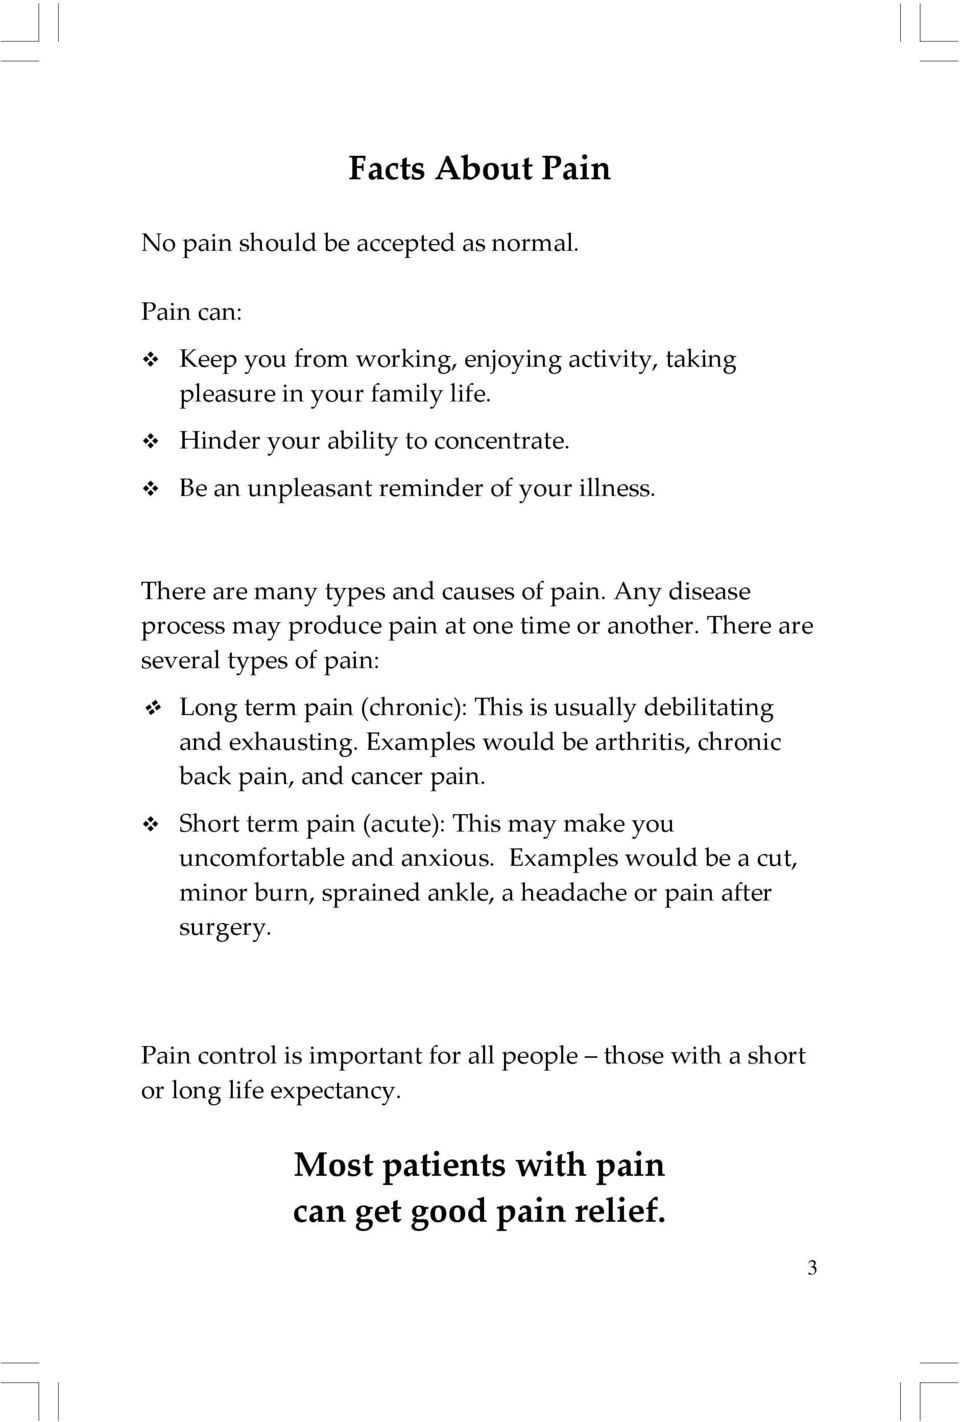 There are several types of pain: Long term pain (chronic): This is usually debilitating and exhausting. Examples would be arthritis, chronic back pain, and cancer pain.